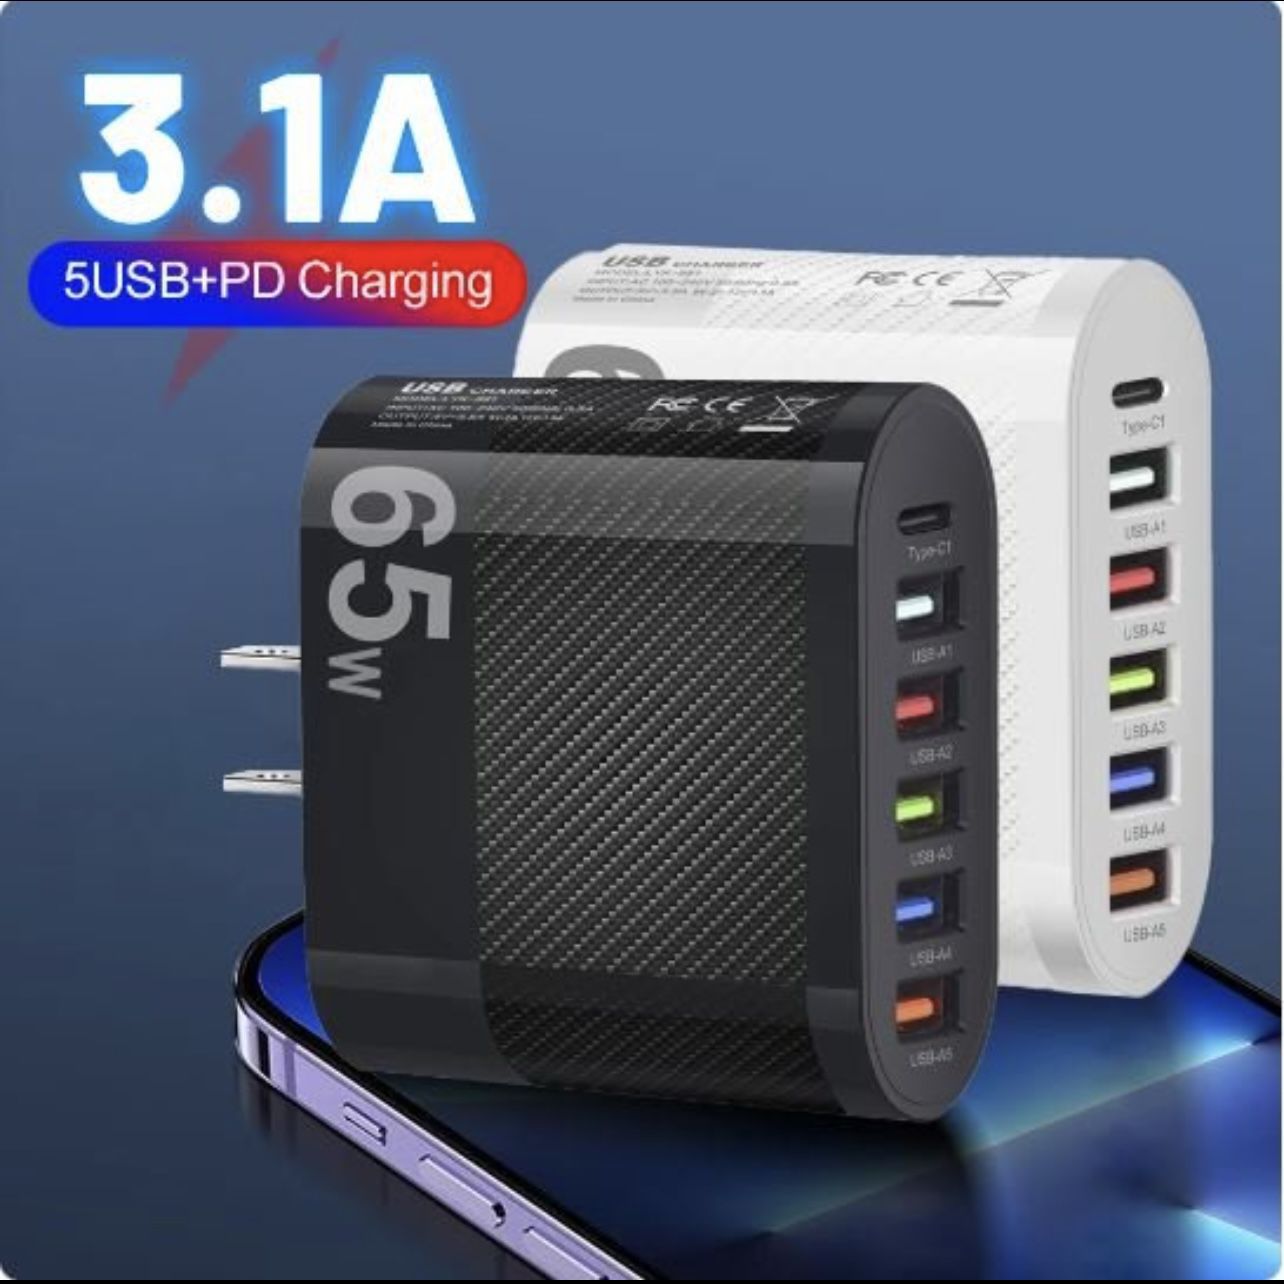 Iphone/Samsung fast charger 65W 5 Port *NEW*